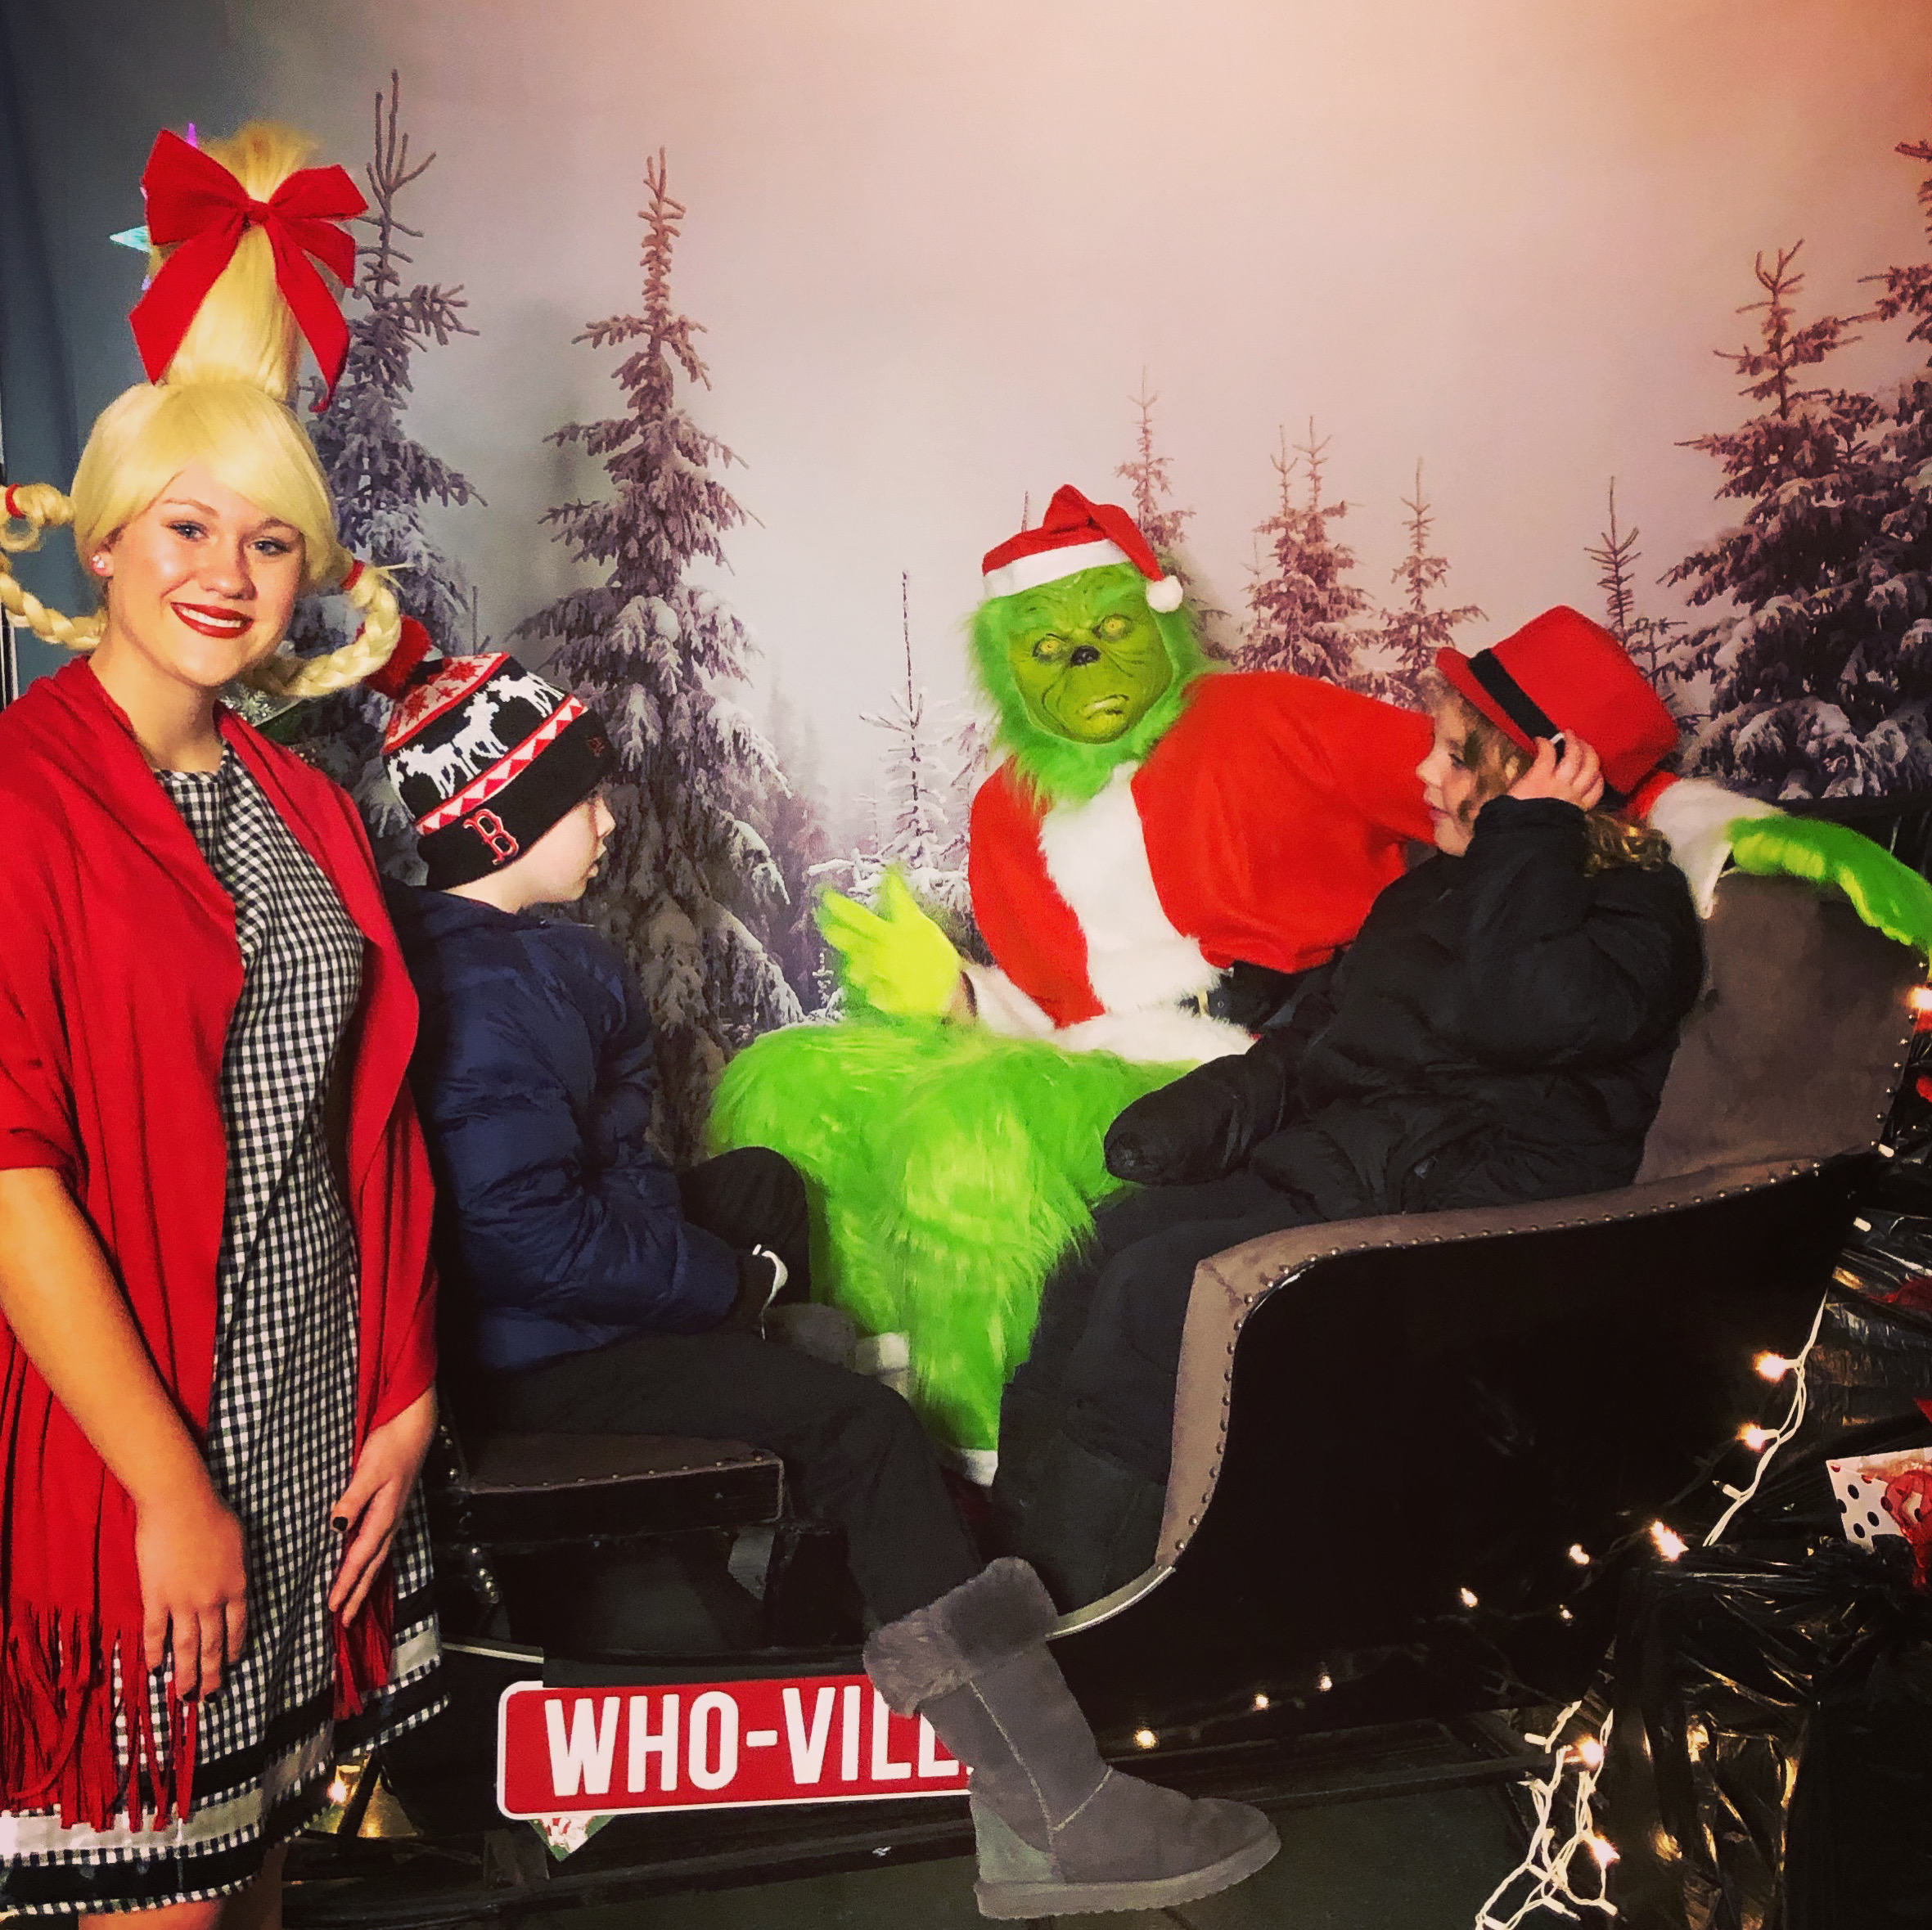 Christina's sons meeting the Grinch.